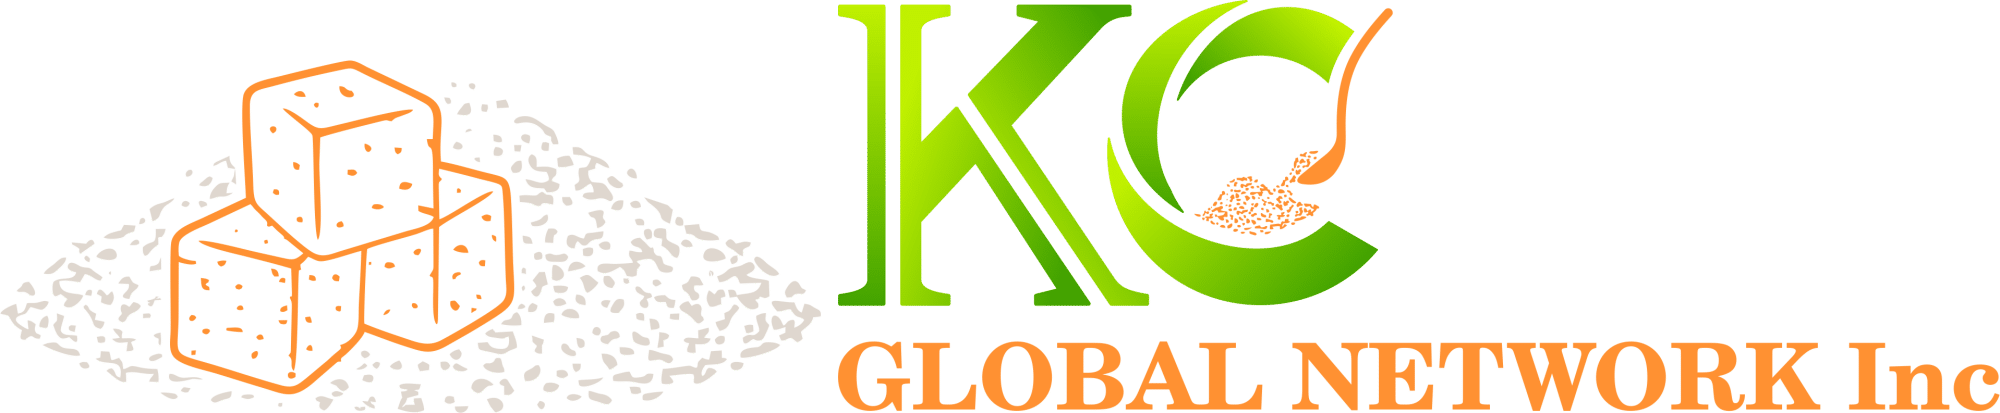 Official logo of KC Global Network Inc, a trusted supplier of conventional cane sugar and organic cane sugar